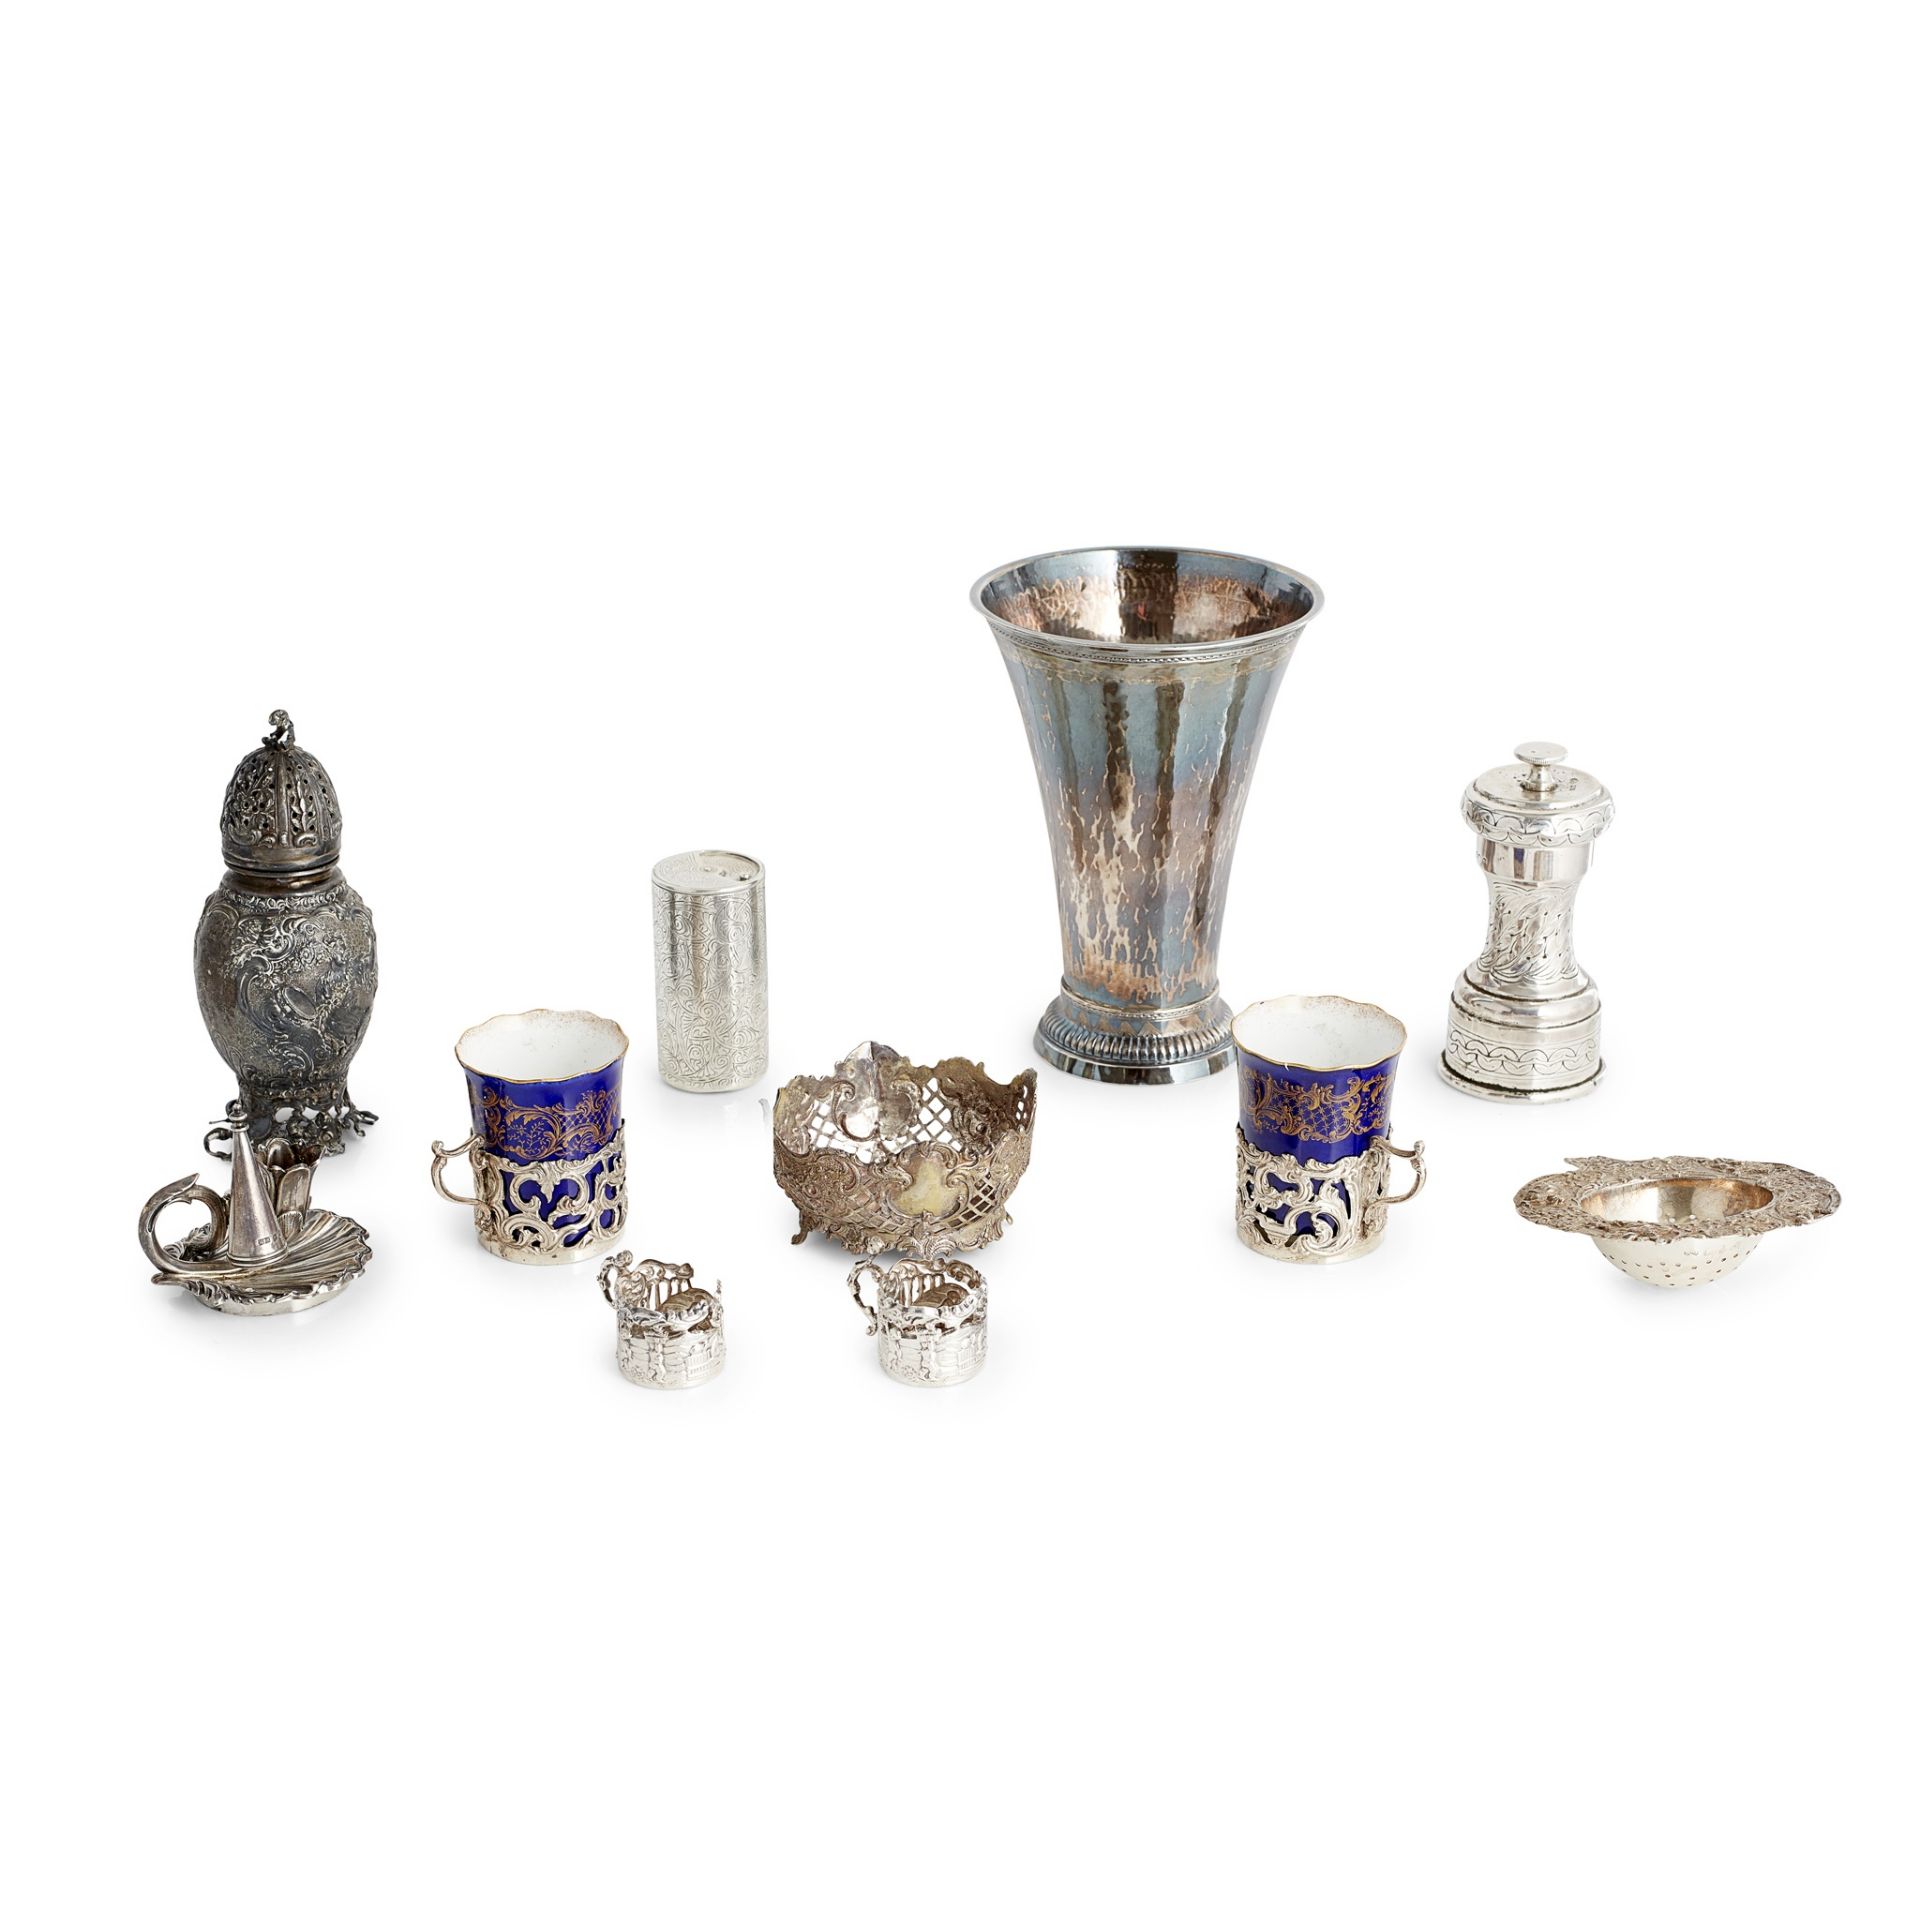 A collection of European silver items